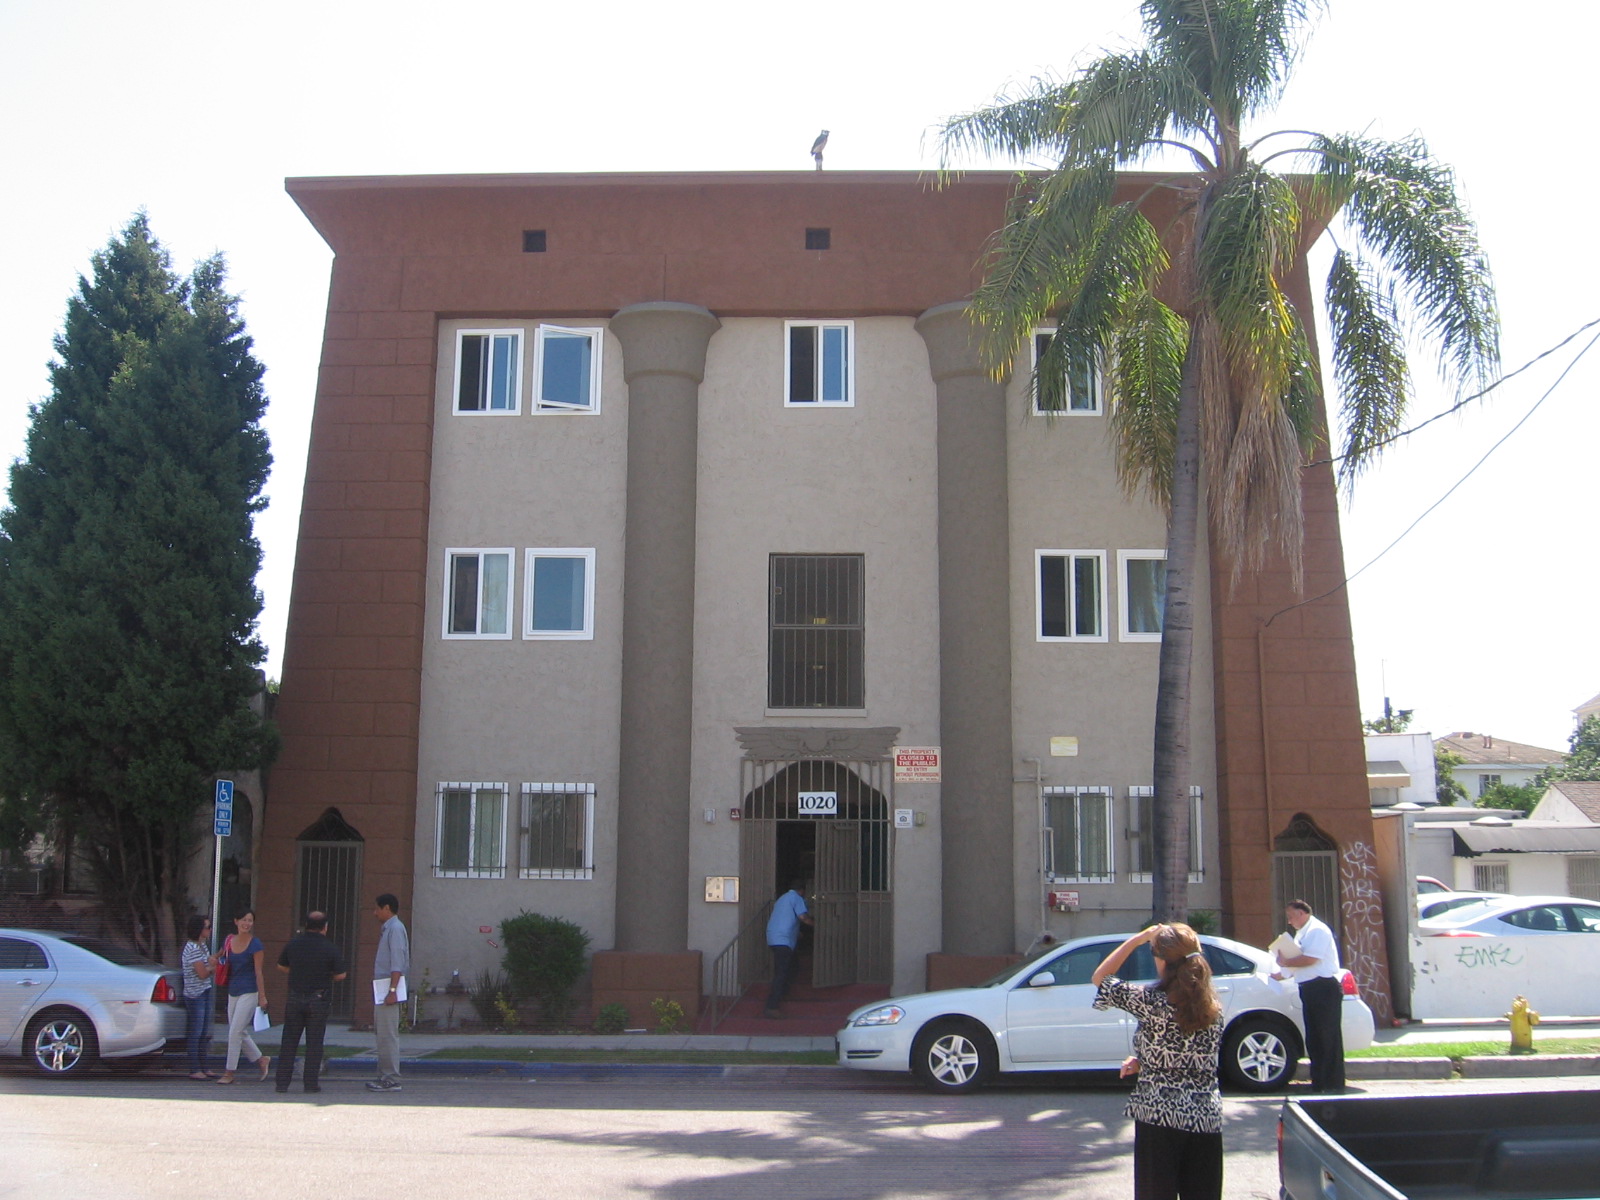 Front view of a two story building in brown and light grey color